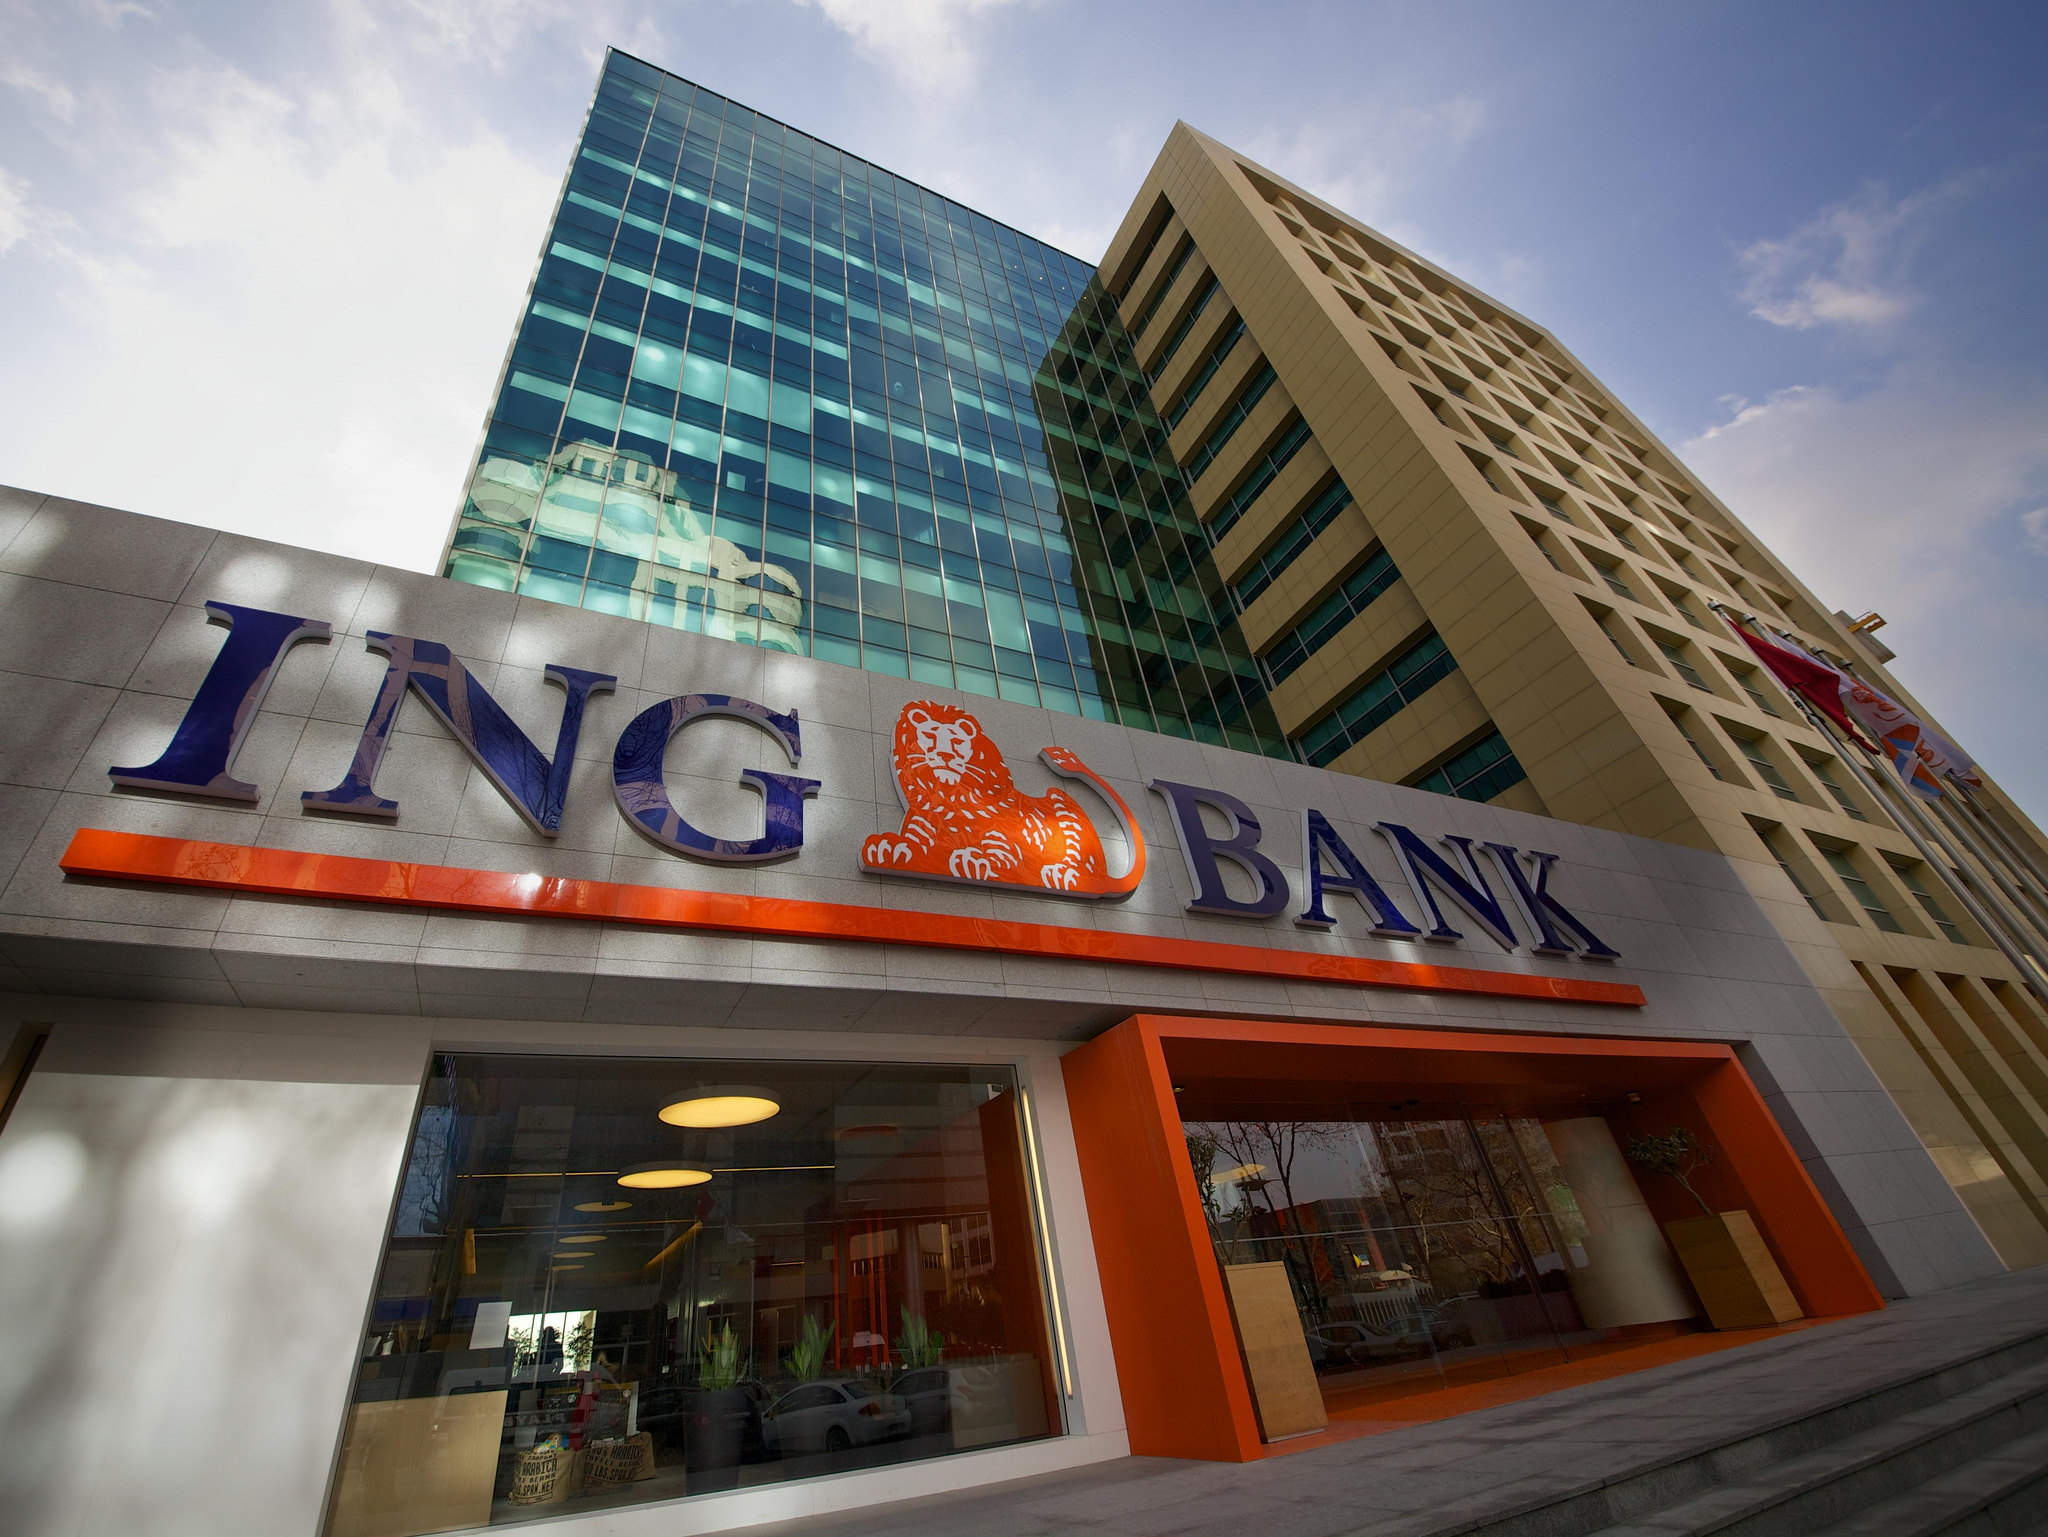 ING enters online marketplaces in Netherlands and Germany